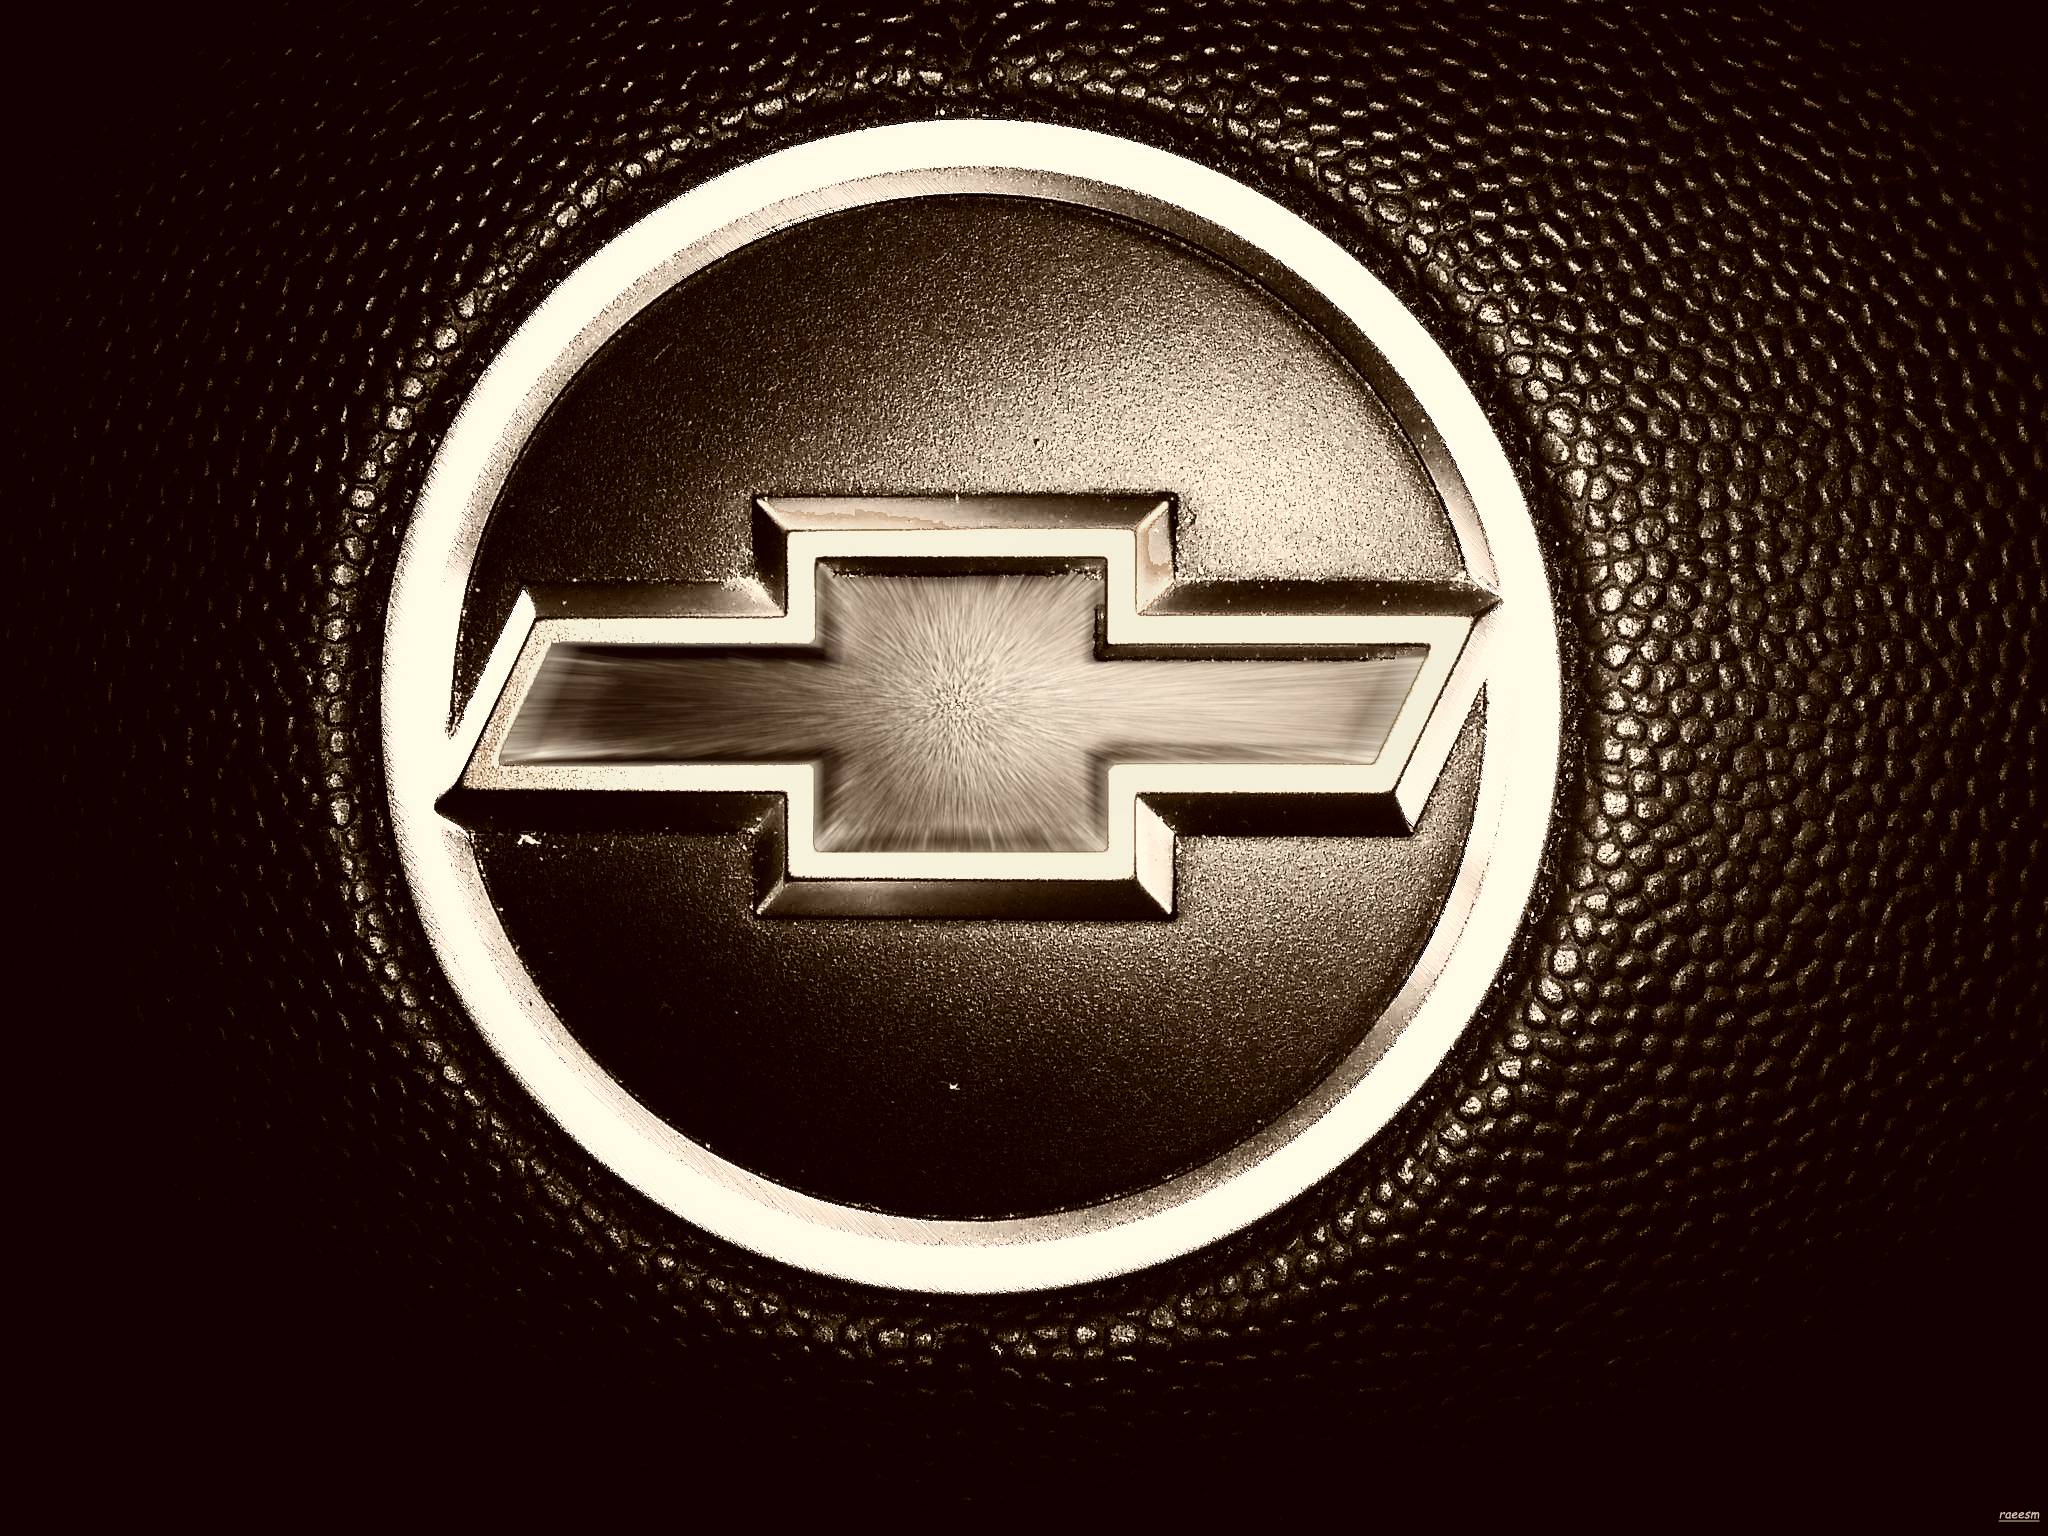 Chevy Emblem Wallpapers